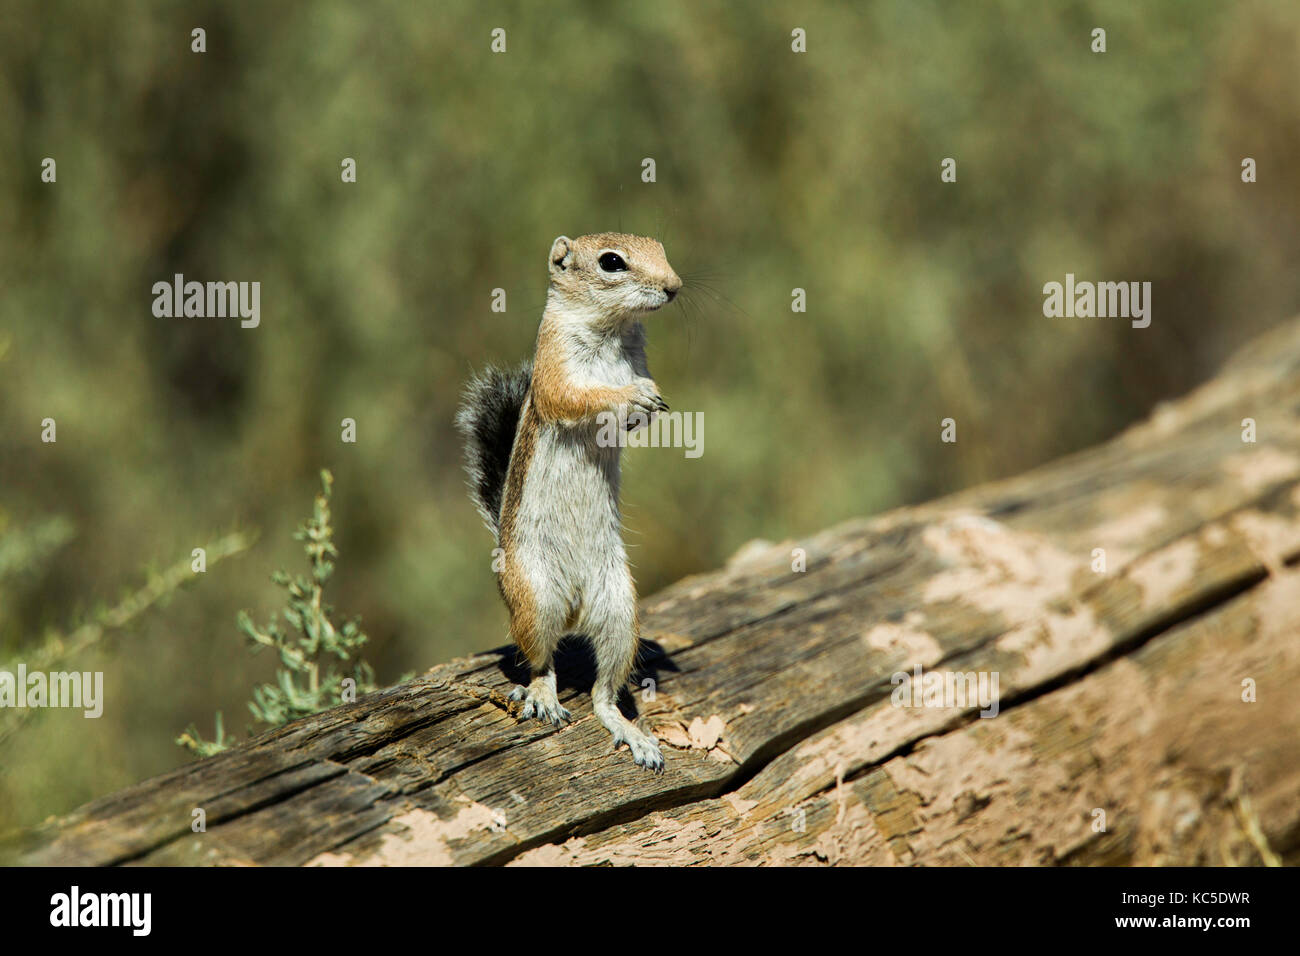 White-tailed Antelope Squirrel Ammospermophilus leucurus Chaco Culture National Historic Park, Nageezi, New Mexico, United States 19 September 2017  Stock Photo